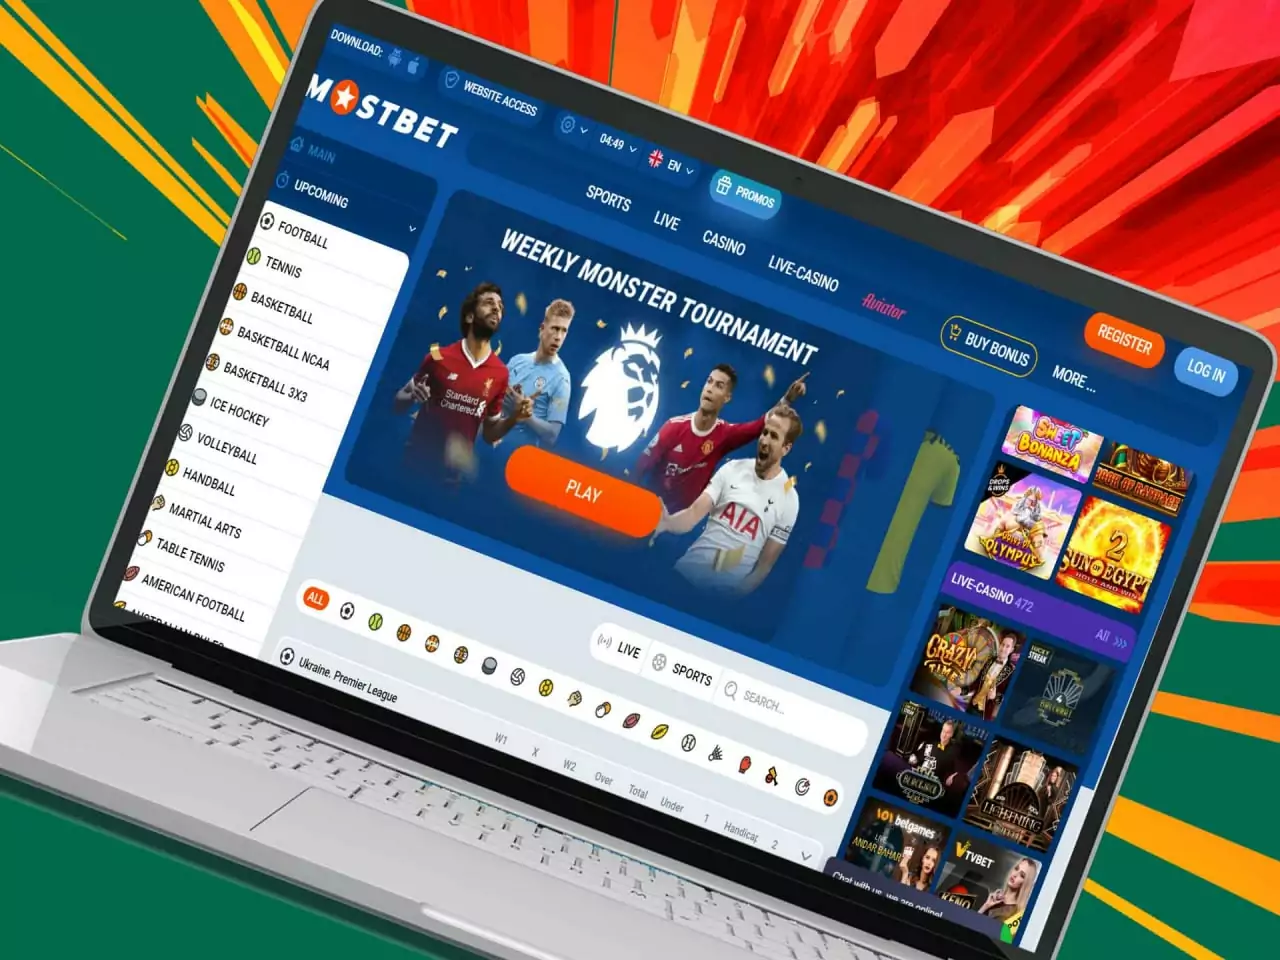 Download the Mostbet PC app to bet via your laptop.